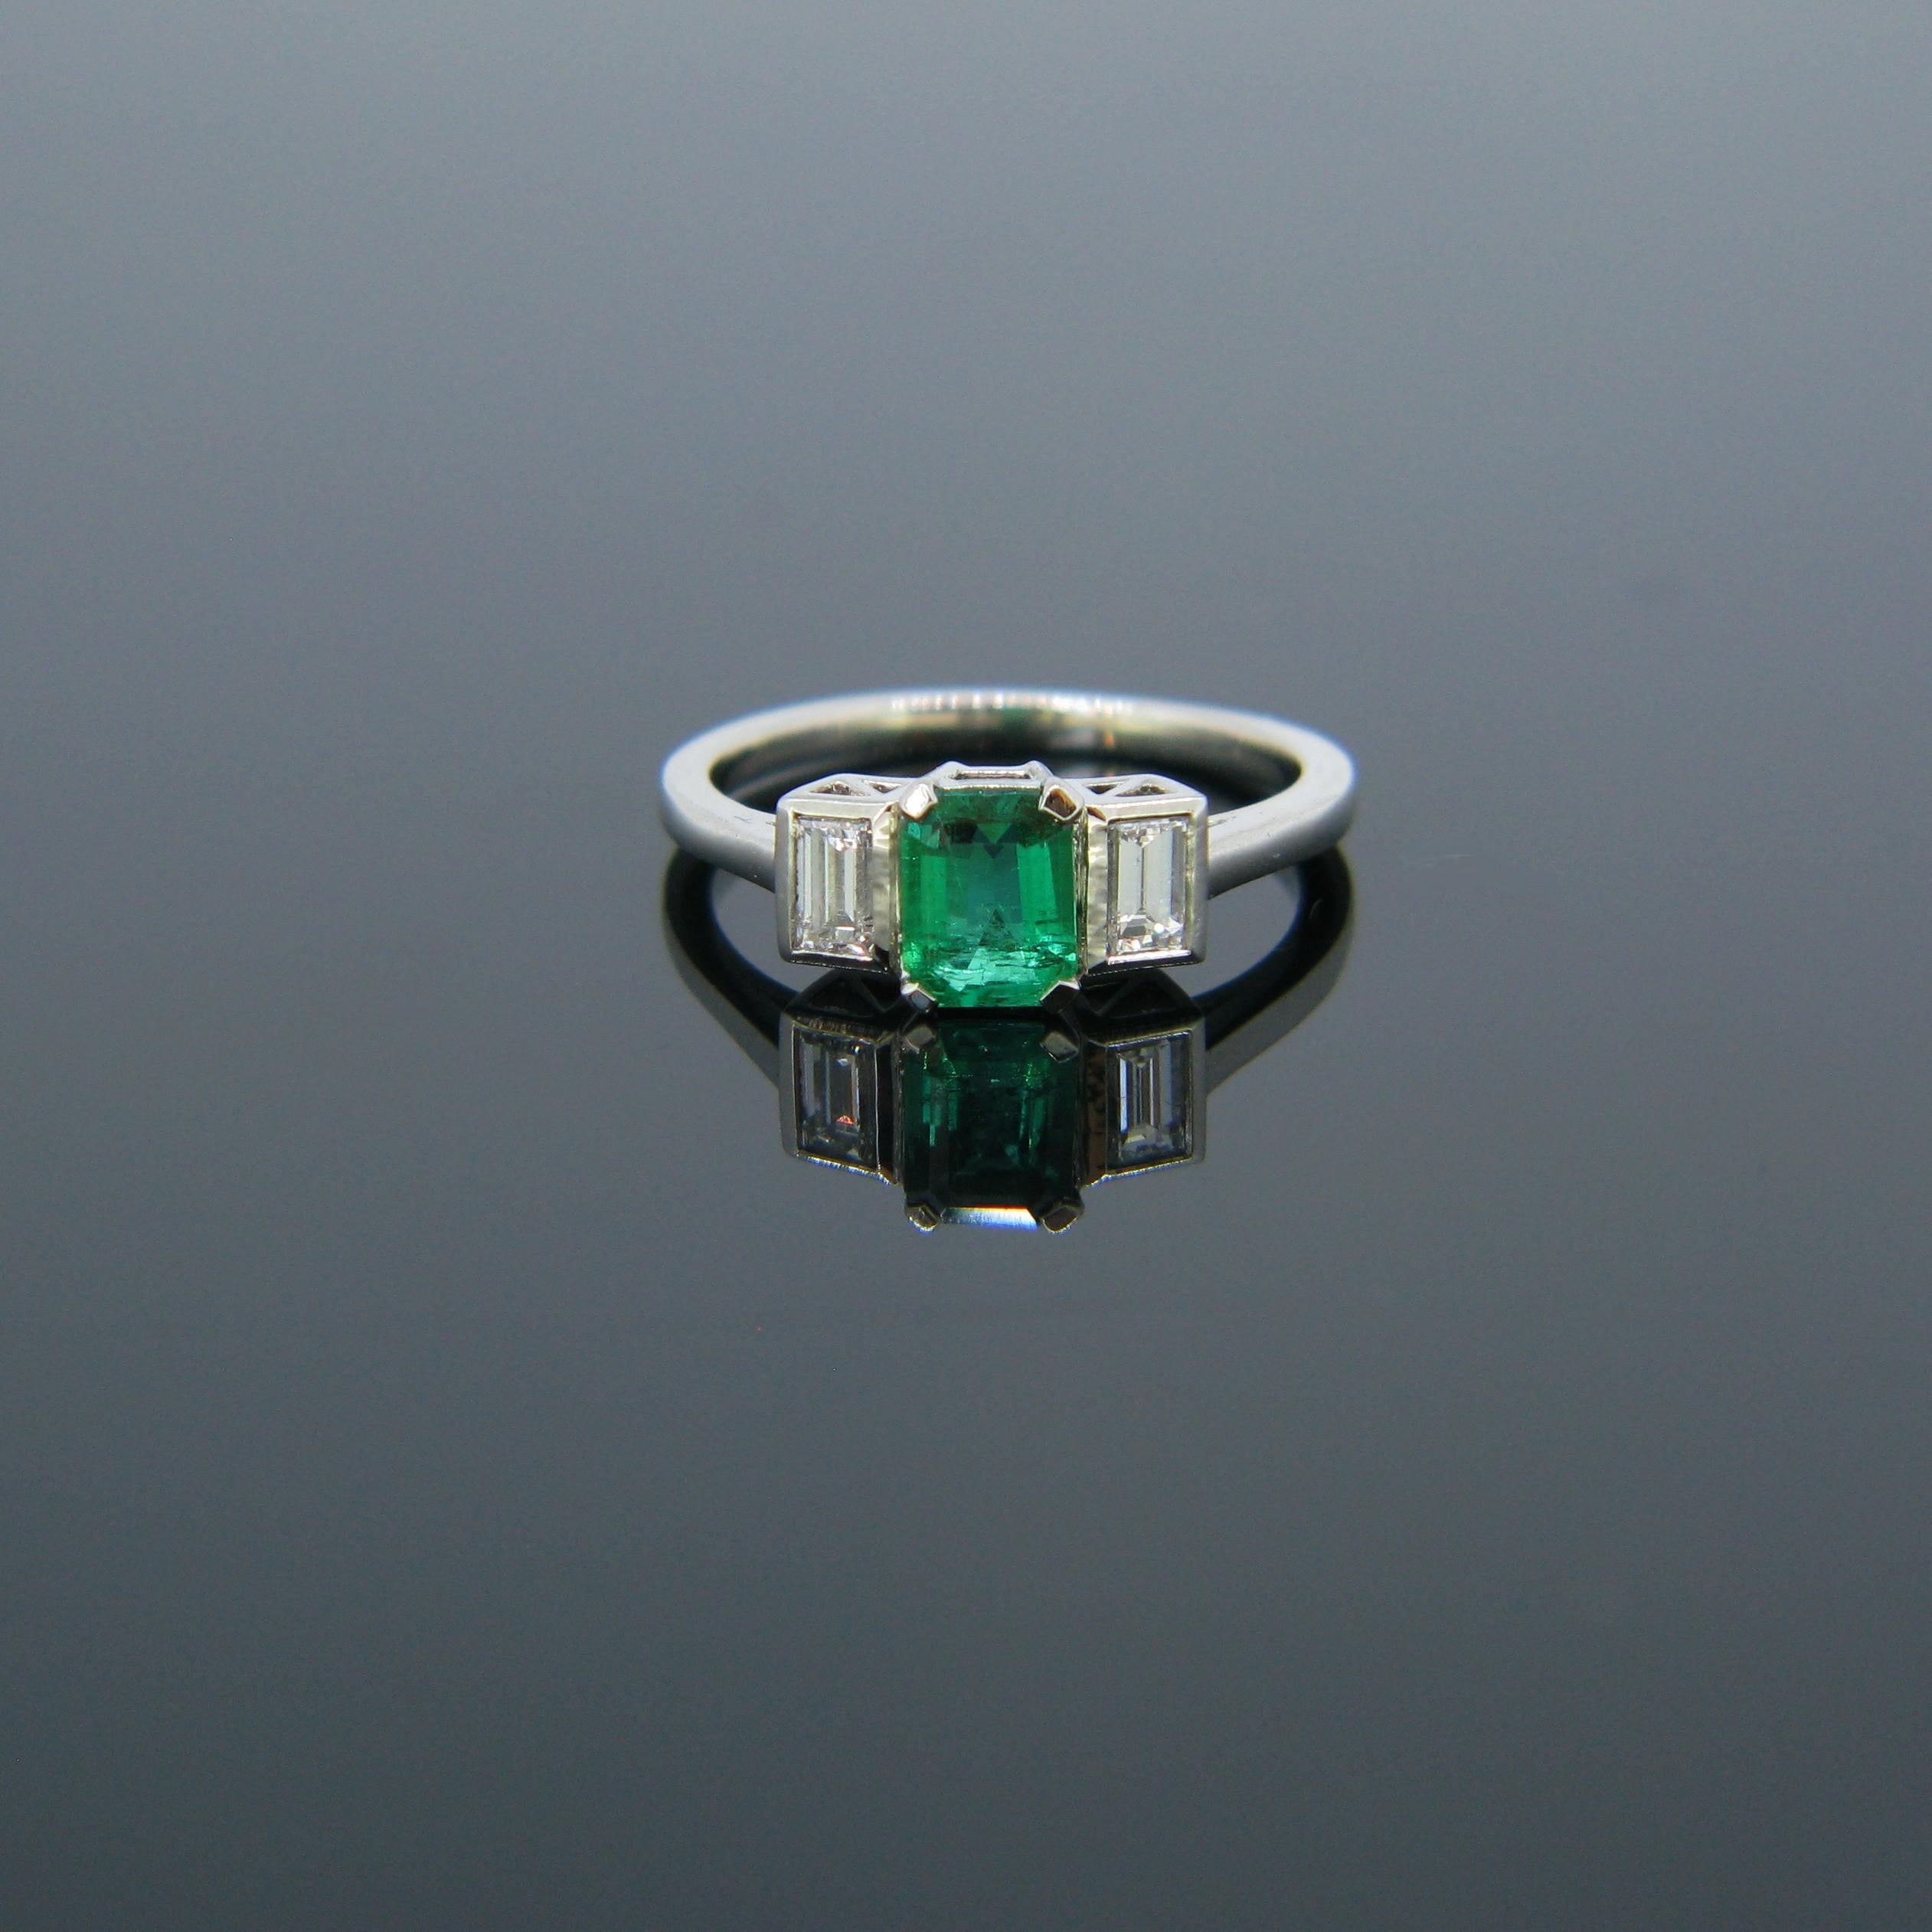 This beautiful ring is set with a Colombian Emerald Minor weighing 0.54ct and with two tappers diamonds of about 0.30ct each on both sides. It is fully made in platinum. It could be the perfect engagement ring as emerald is said to be the stone of